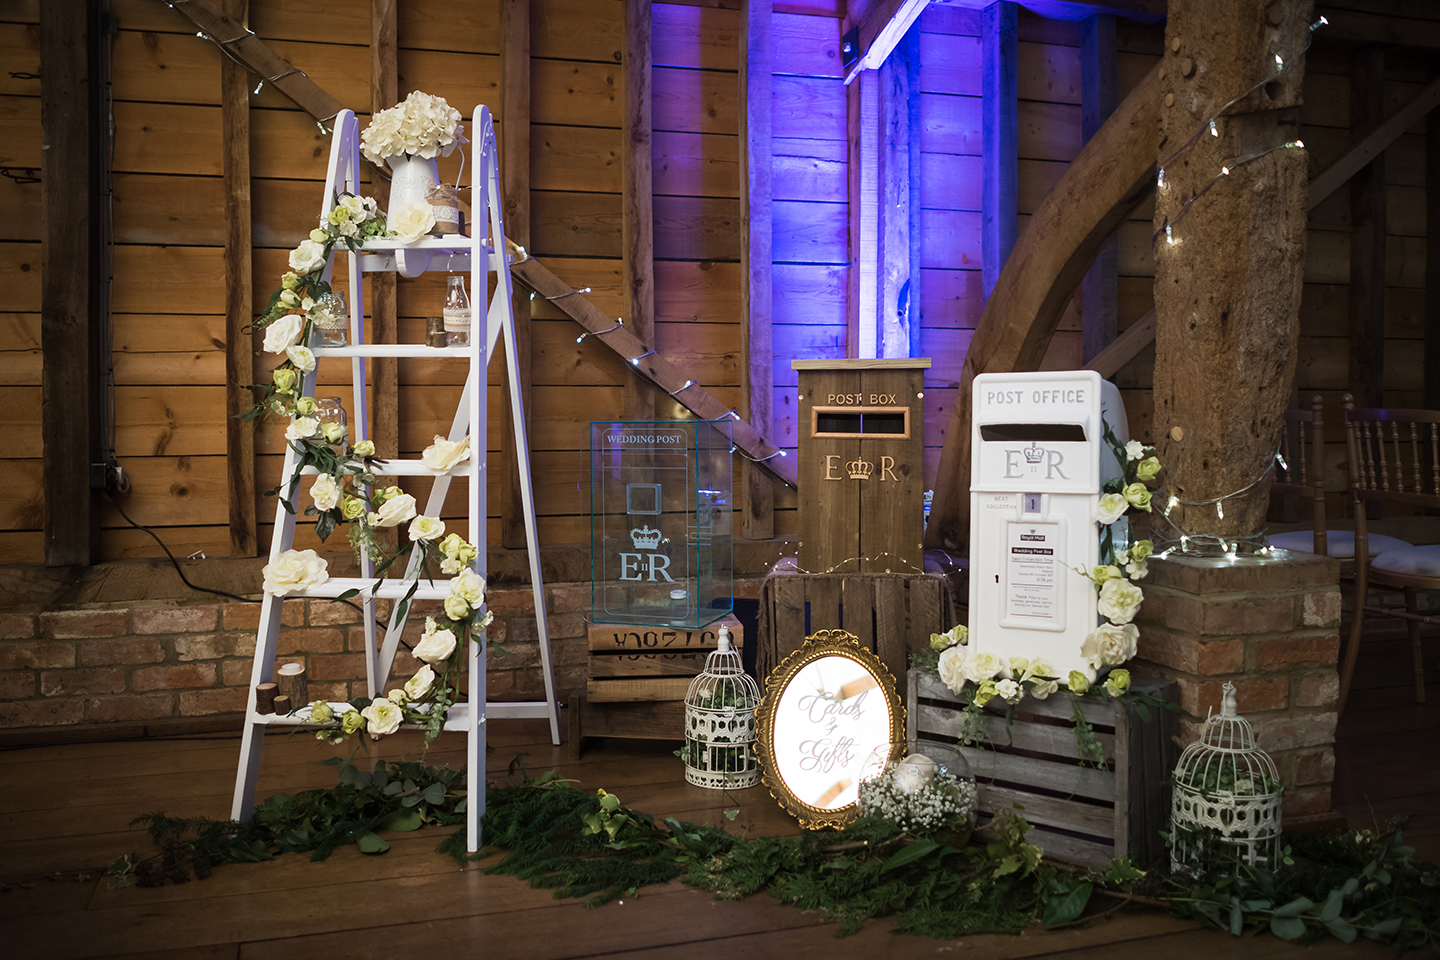 Wedding décor suppliers will be on hand at Bassmead Manor Barns tasting events to answer all your questions